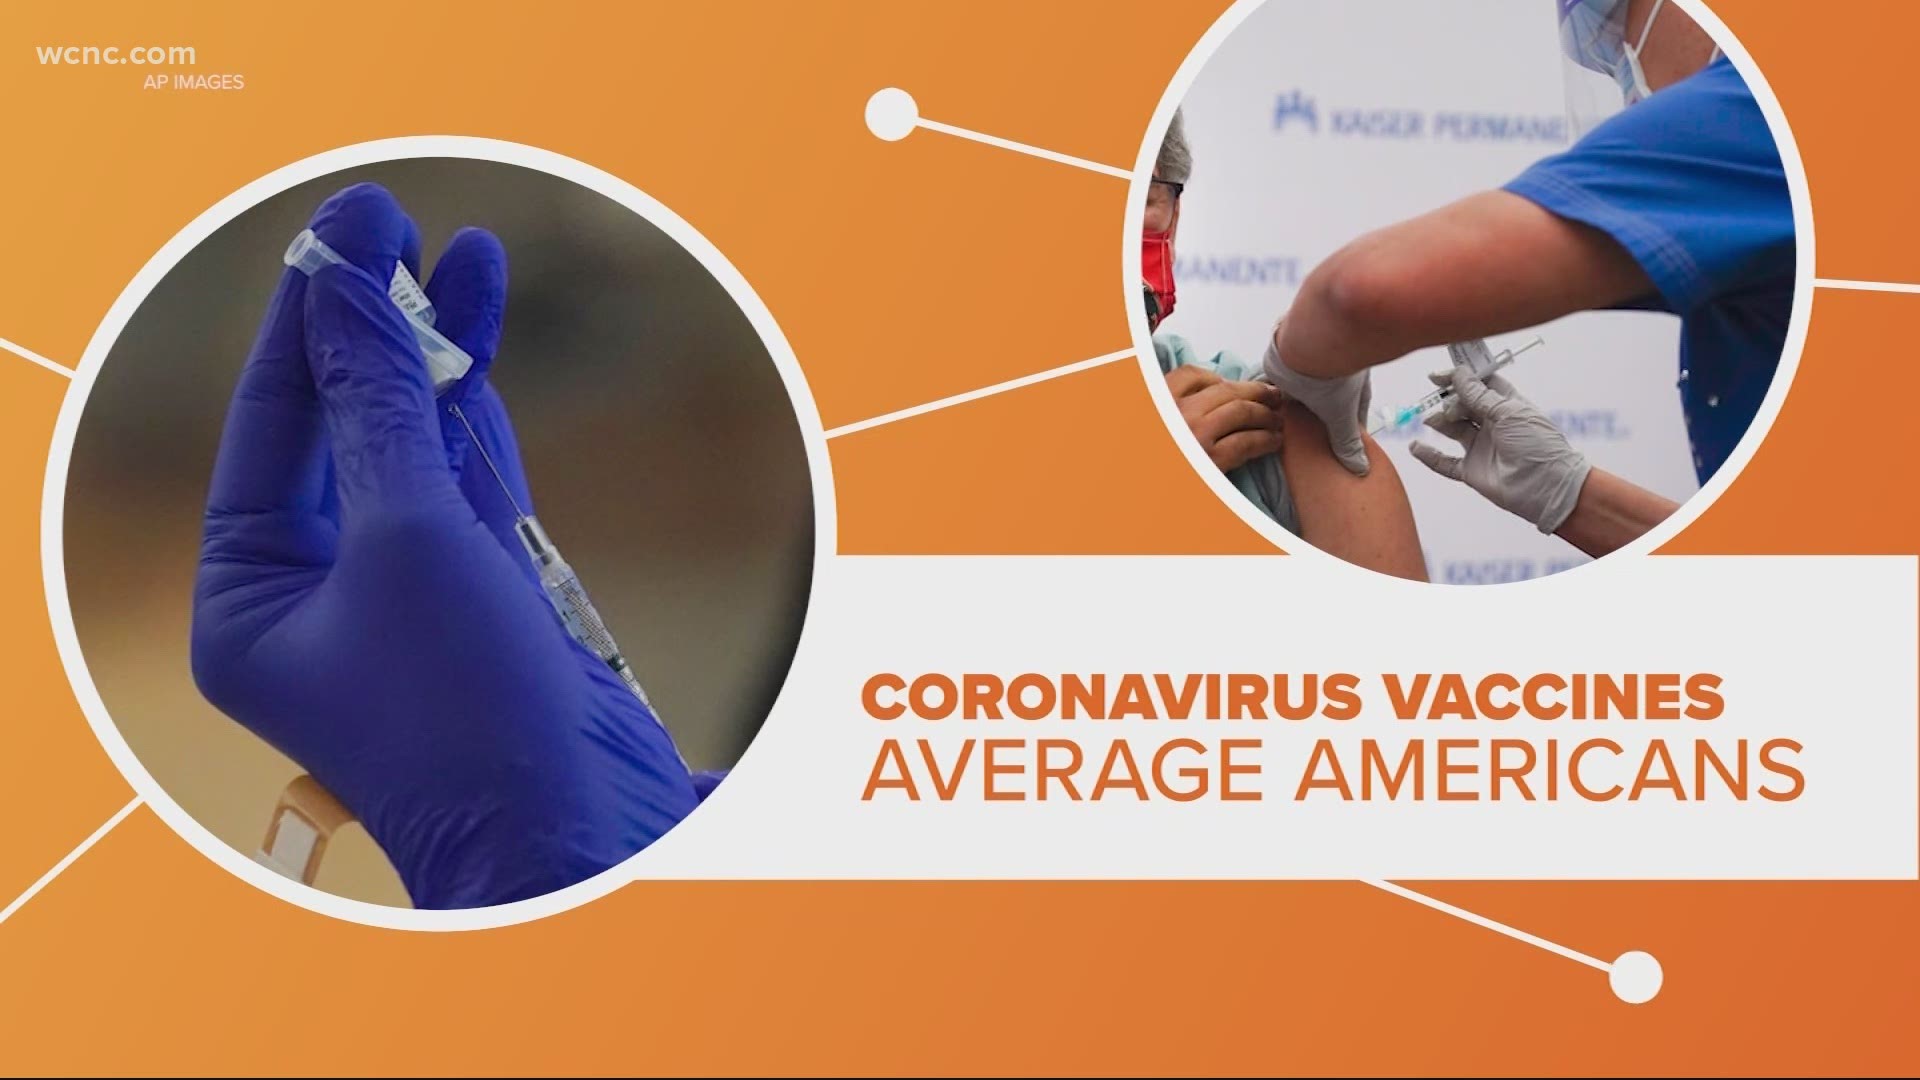 People are now getting the COVID-19 vaccine in the U.S., but the limited doses are for health care workers. The average American still has to wait a while.